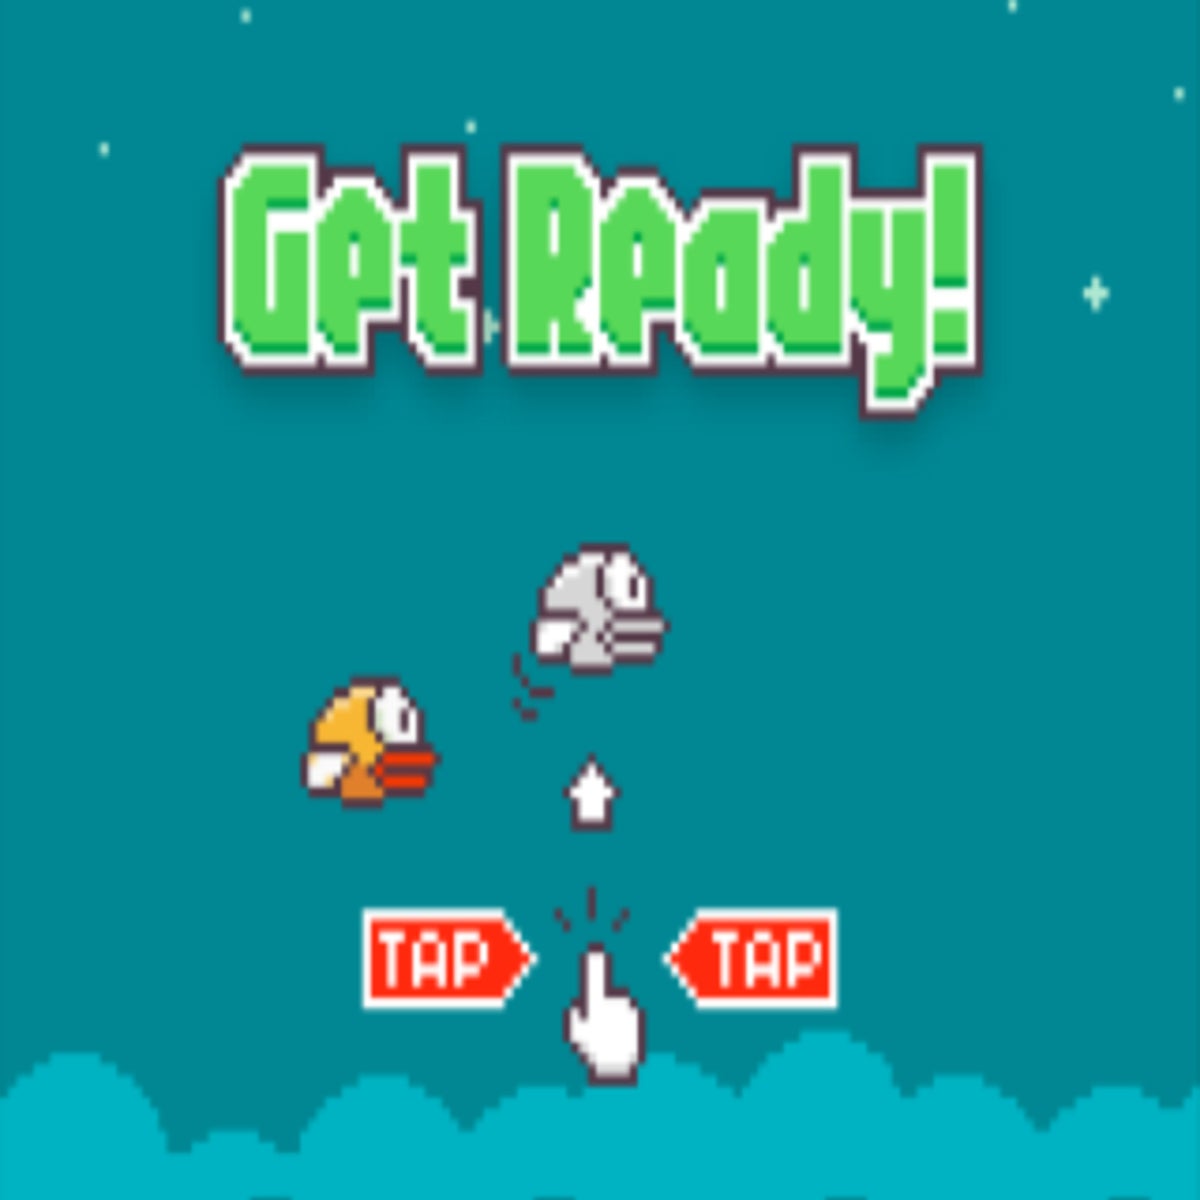 Flappy Birds Clone in 10 minutes - Free Tutorial